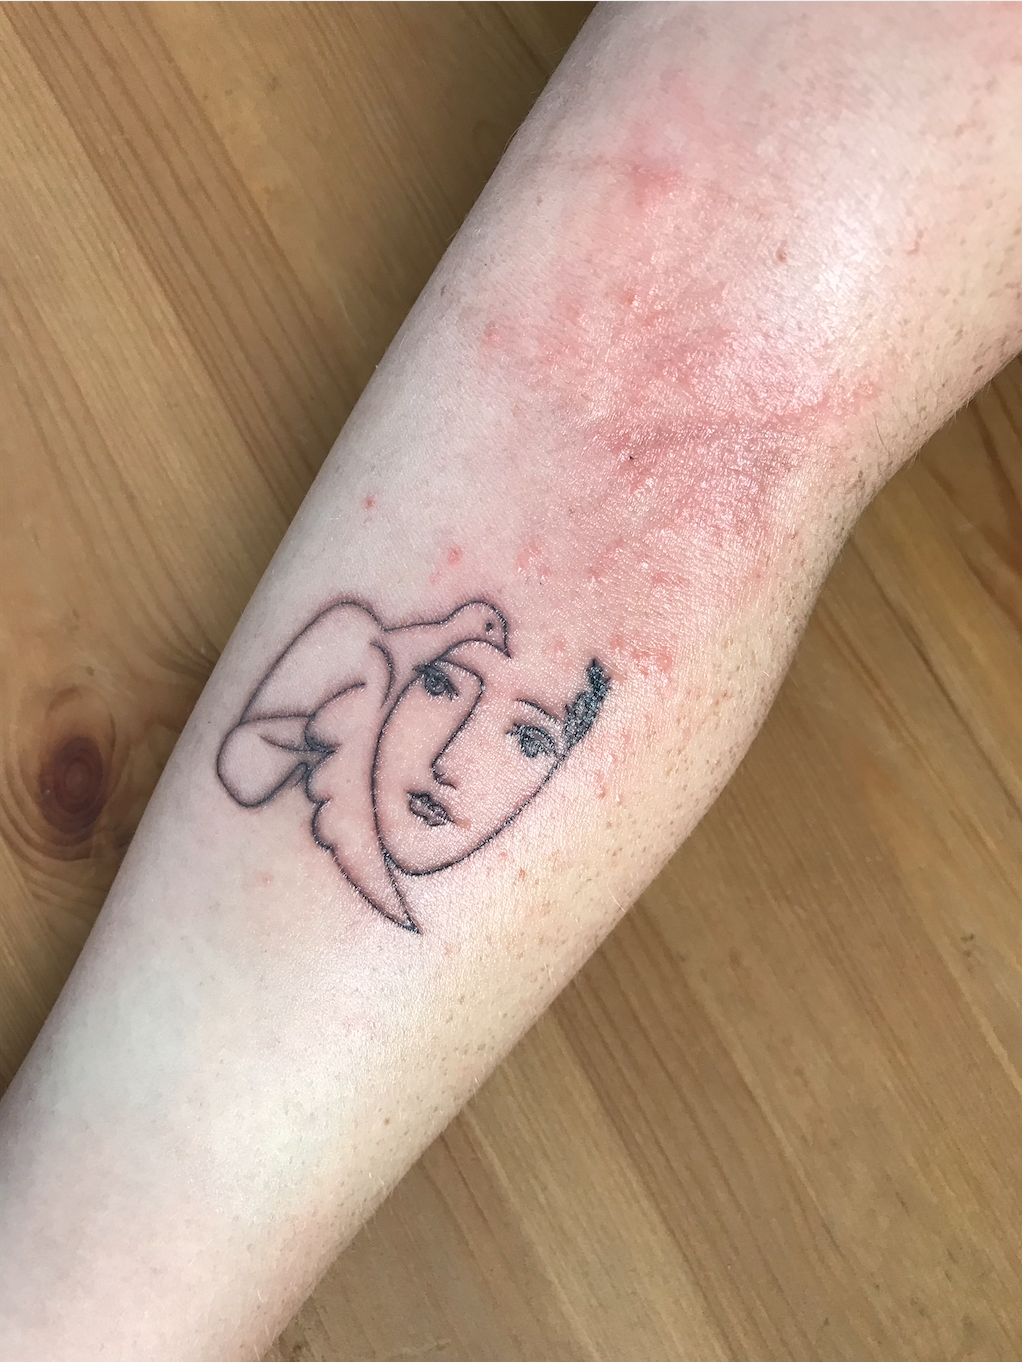 A Guide to Your First Tattoo, According to Pros - First Tattoo Tips